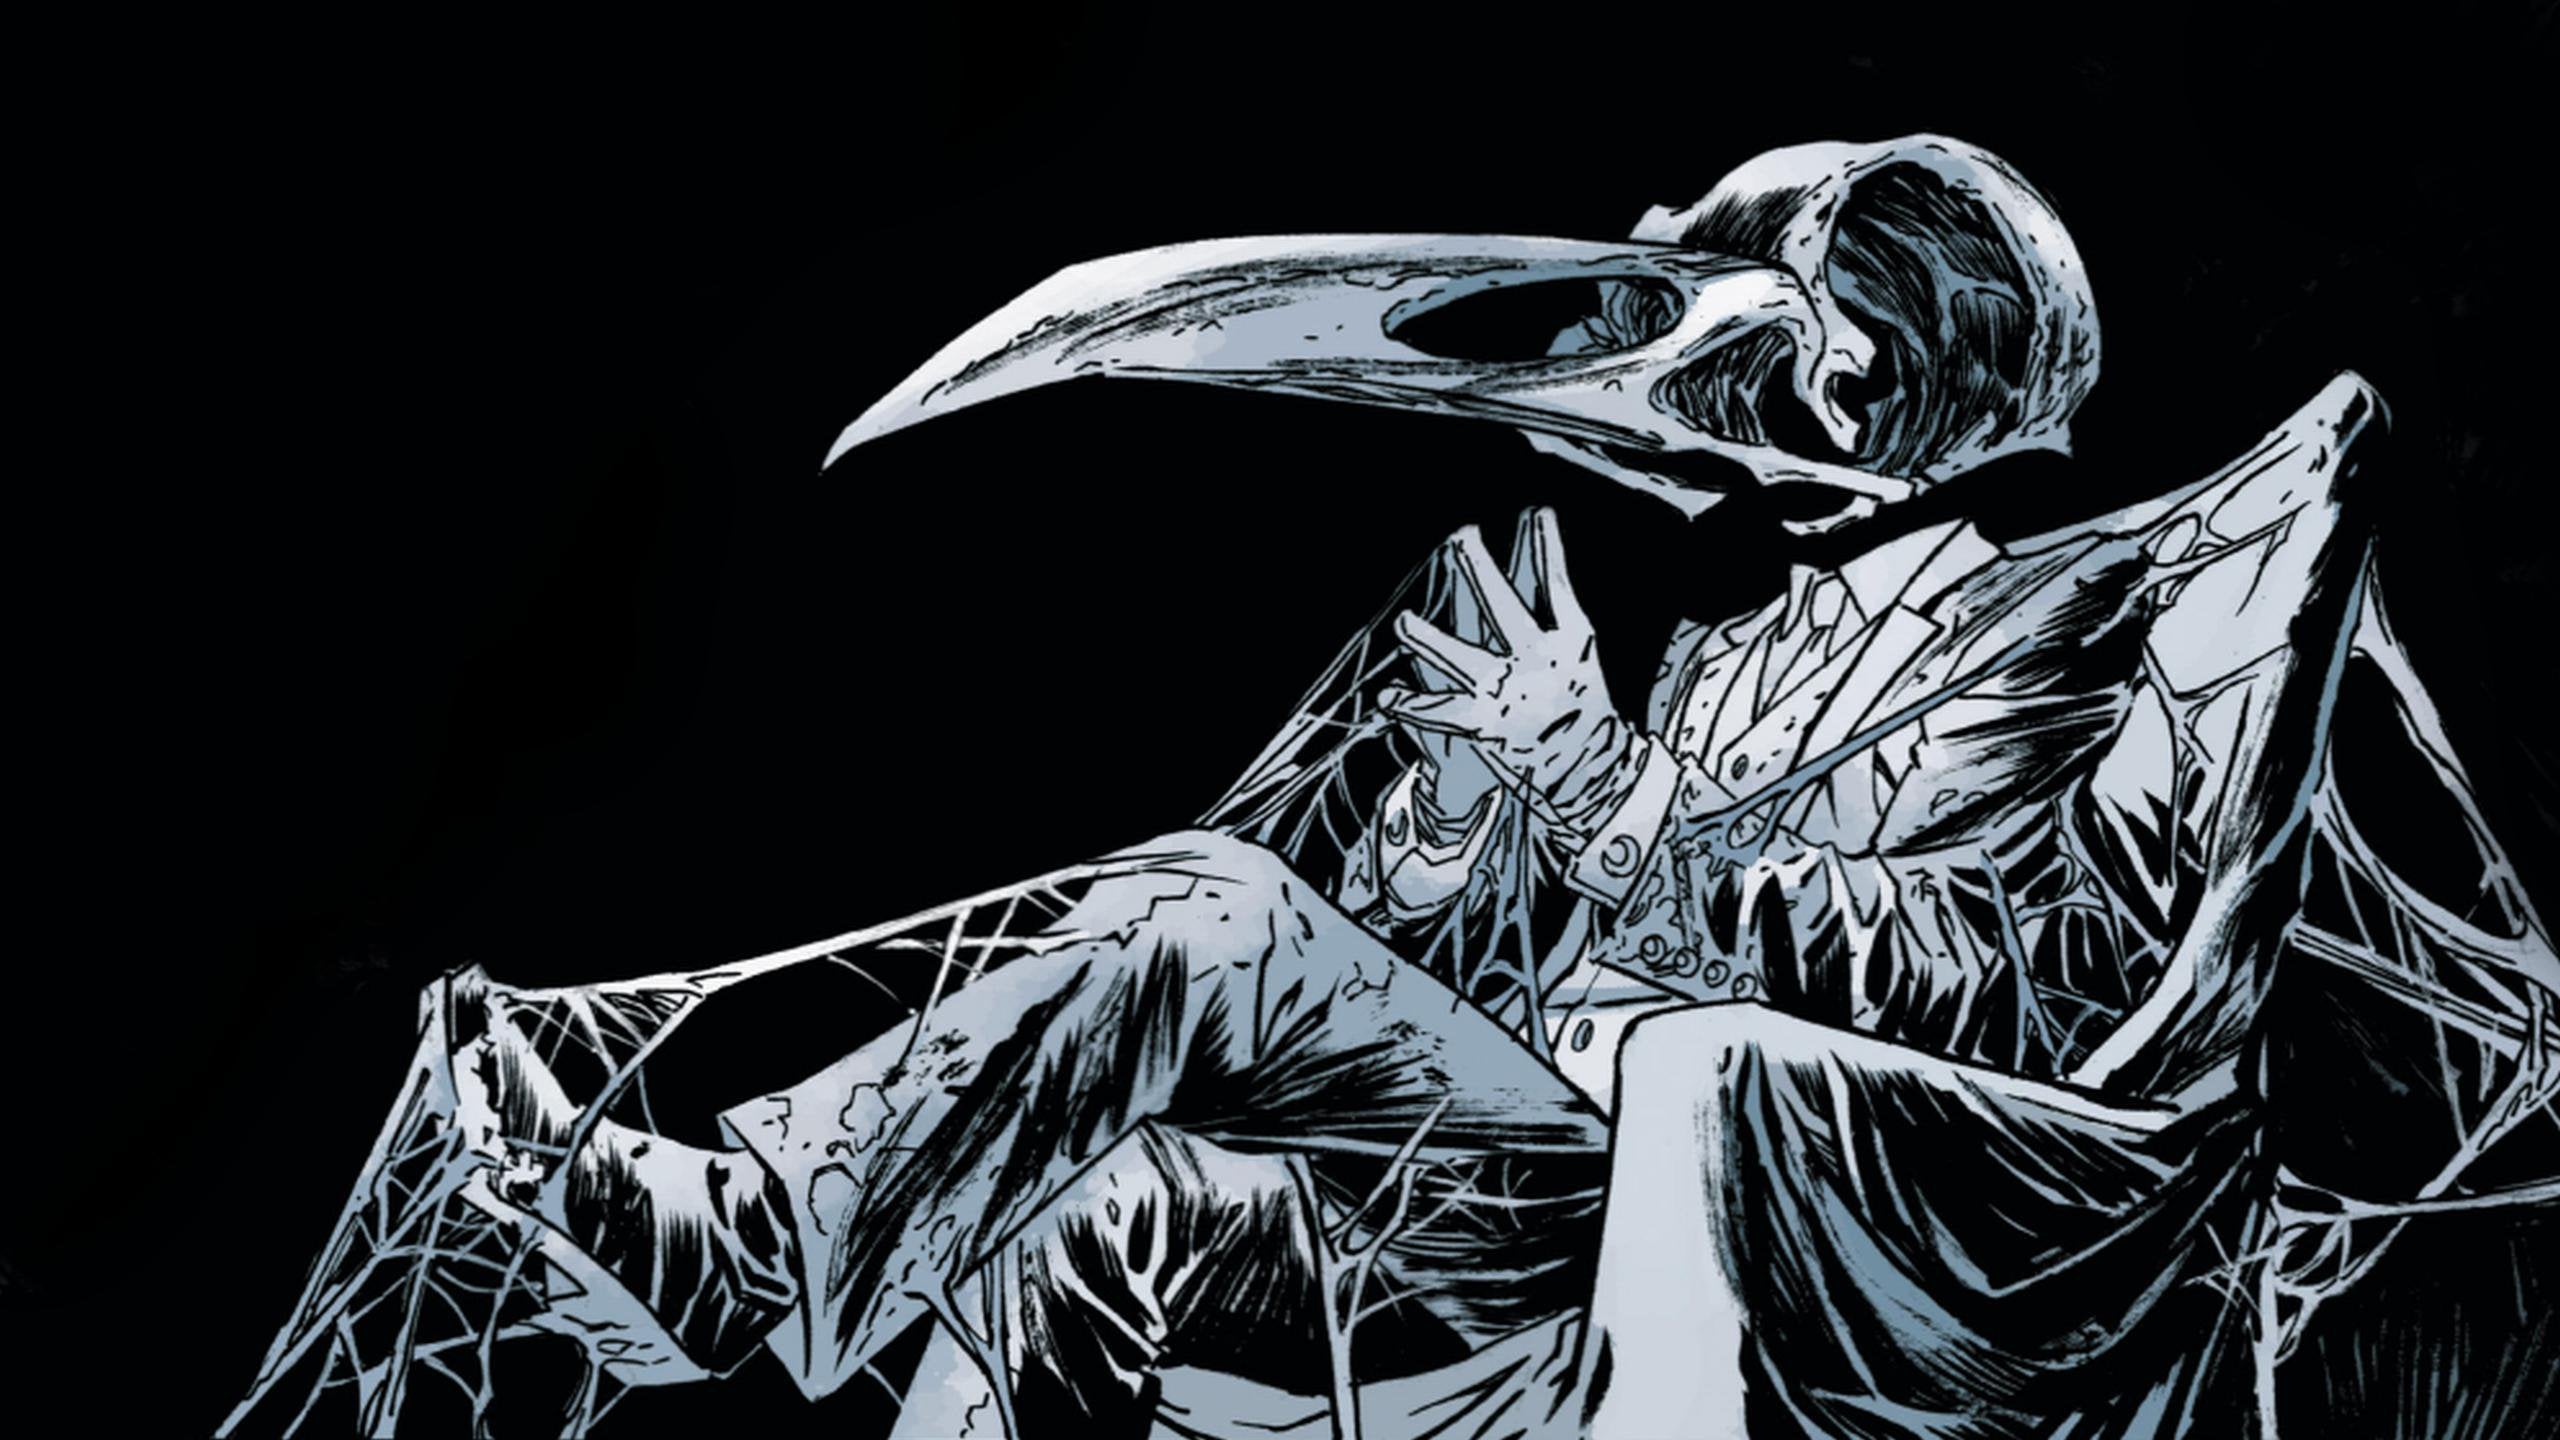 Thought this panel from the new Moon Knight would make a great desktop wallpaper